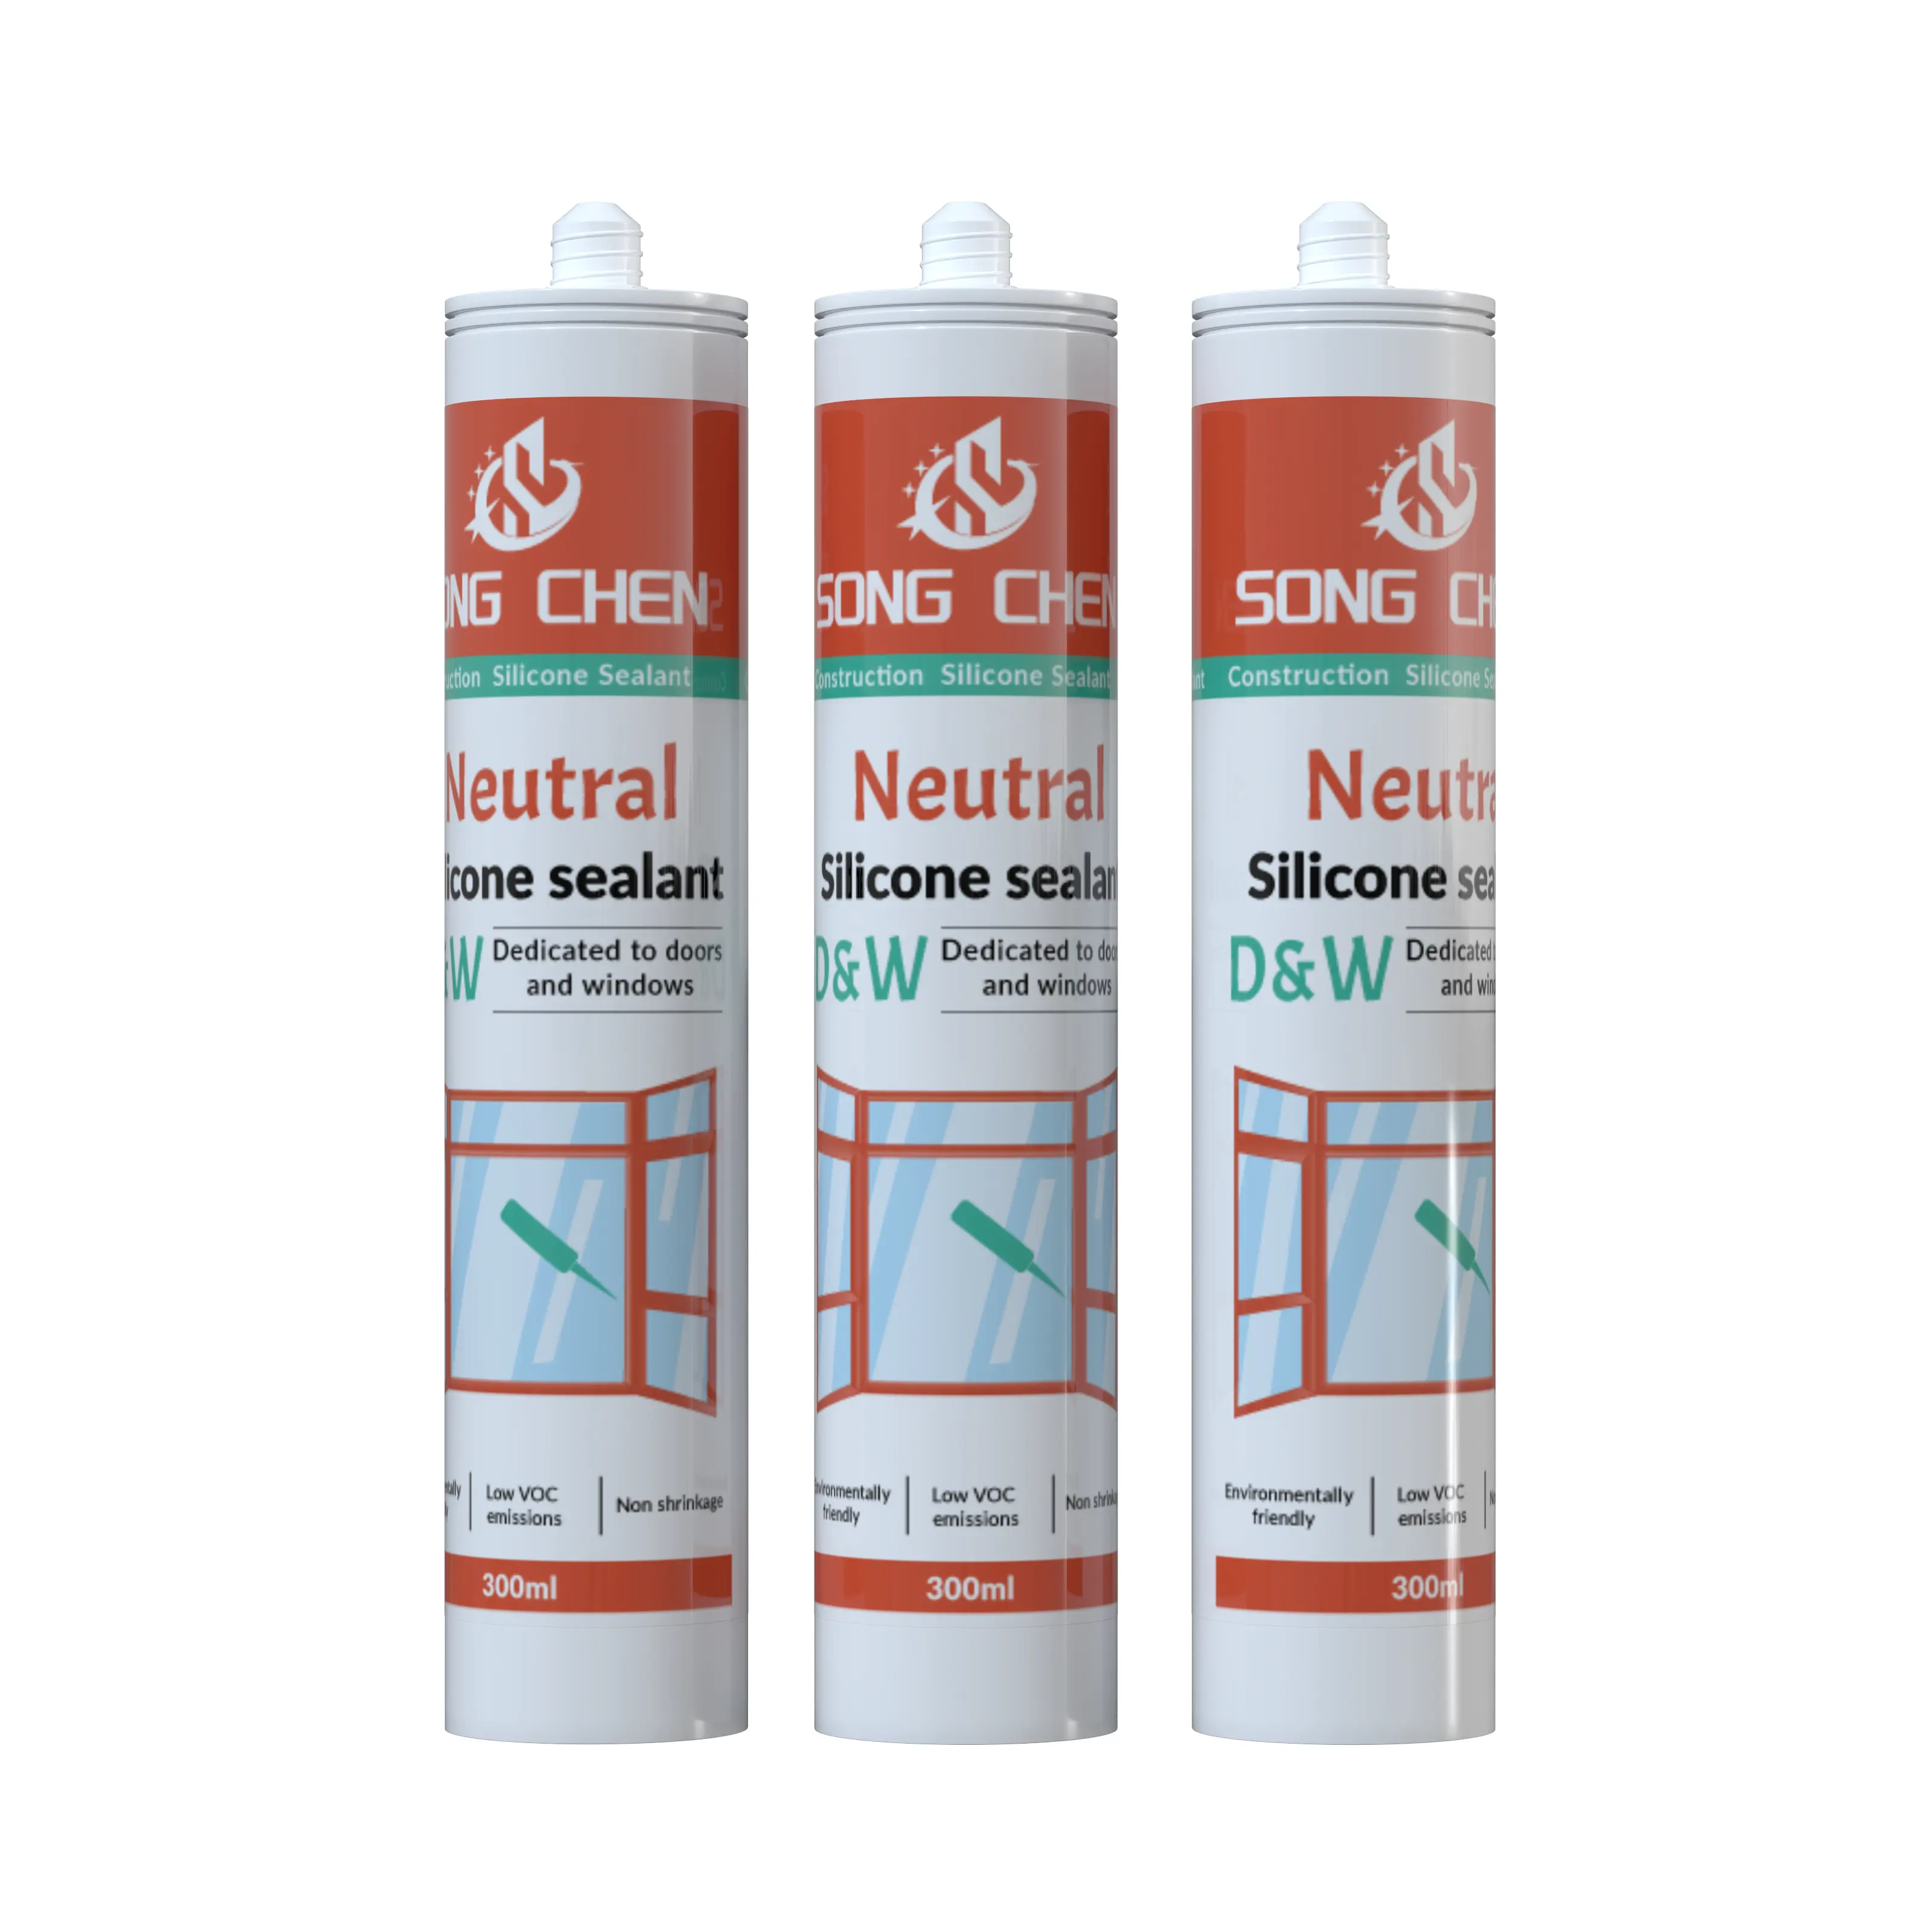 SC-D&W one-component neutral silicone sealant UV degradation resistant weatherproof strong bonding outdoor silicone sealant